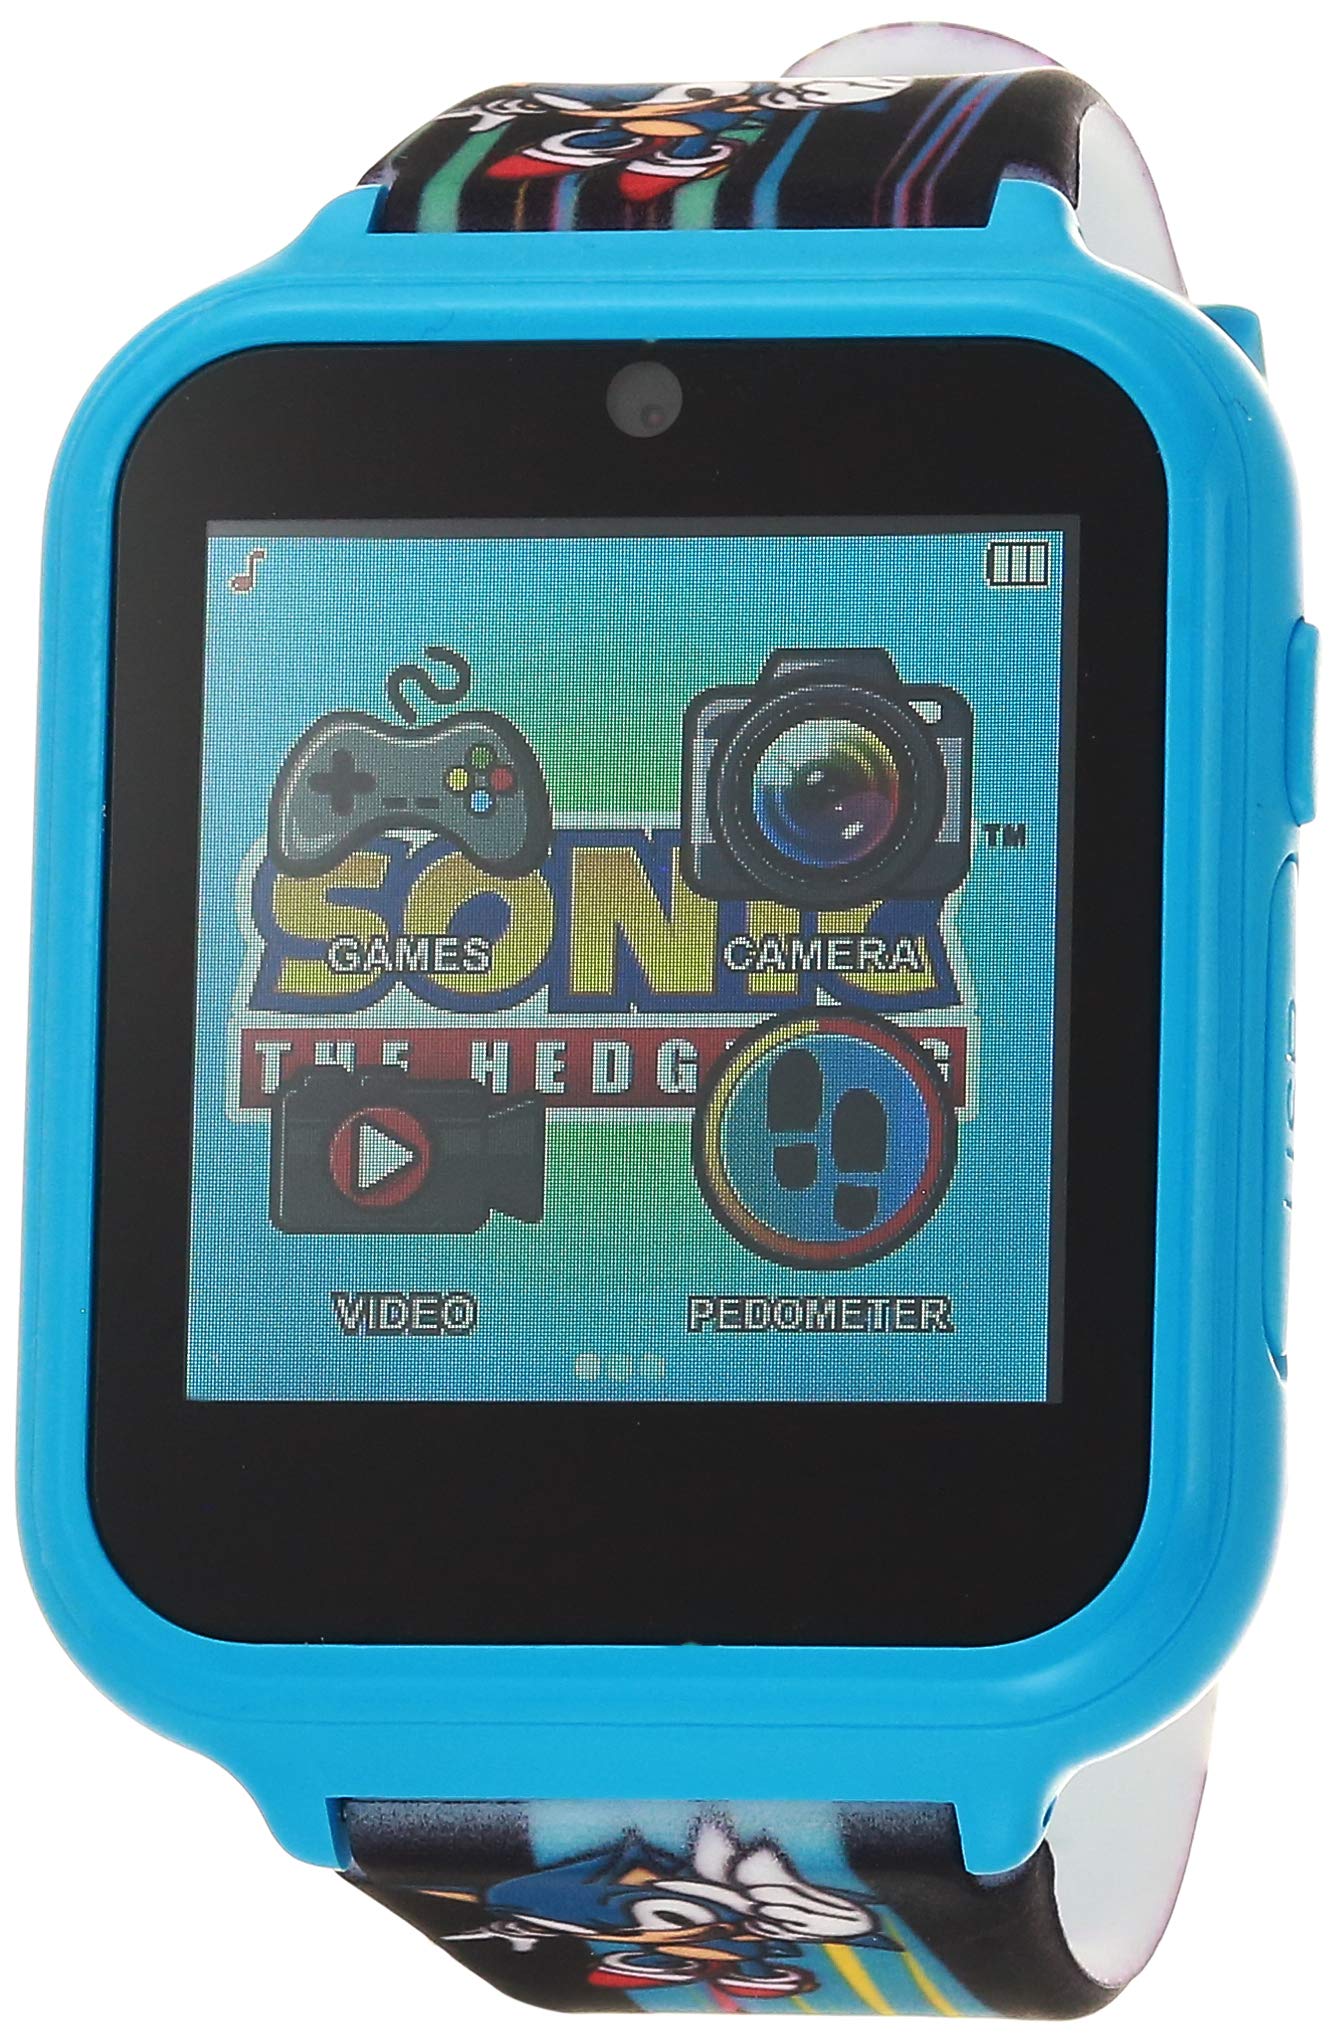 Accutime Kids SEGA Sonic The Hedgehog Blue Educational Touchscreen Smart Watch Toy for Boys, Girls, Toddlers - Selfie Cam, Learning Games, Alarm, Calculator, Pedometer (Model: SNC4141AZ)